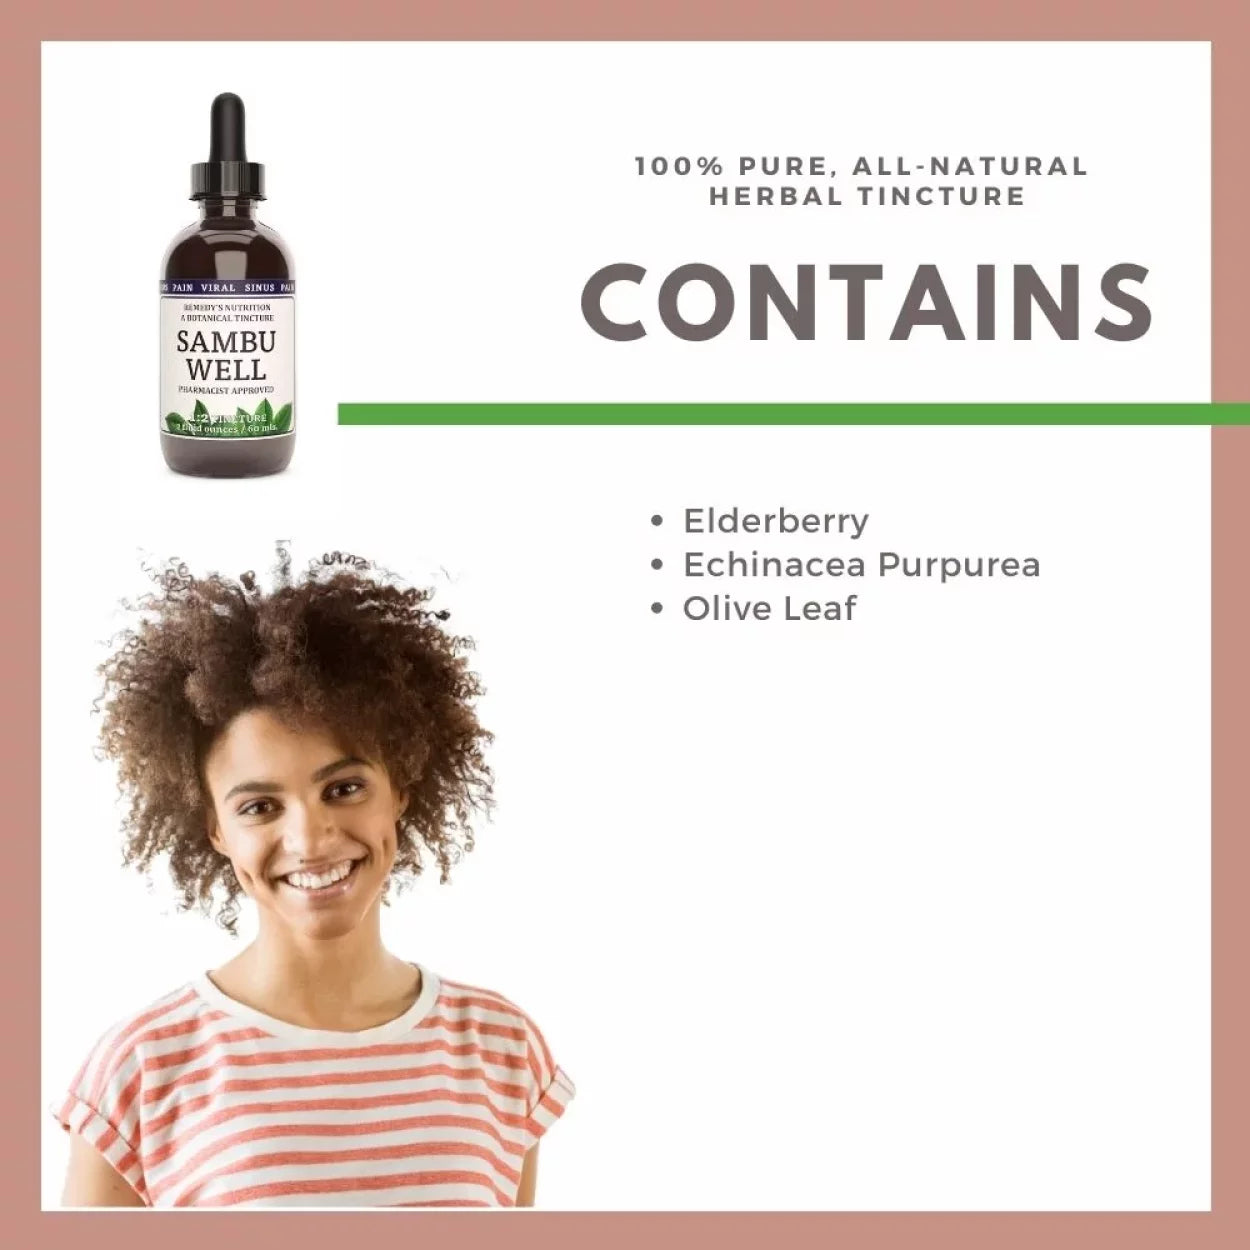 Image of Remedy's Nutrition® Sambu Well Tincture Dietary Supplement bottle. Made in USA. Elderberry, Echinacea, Olive Leaf.